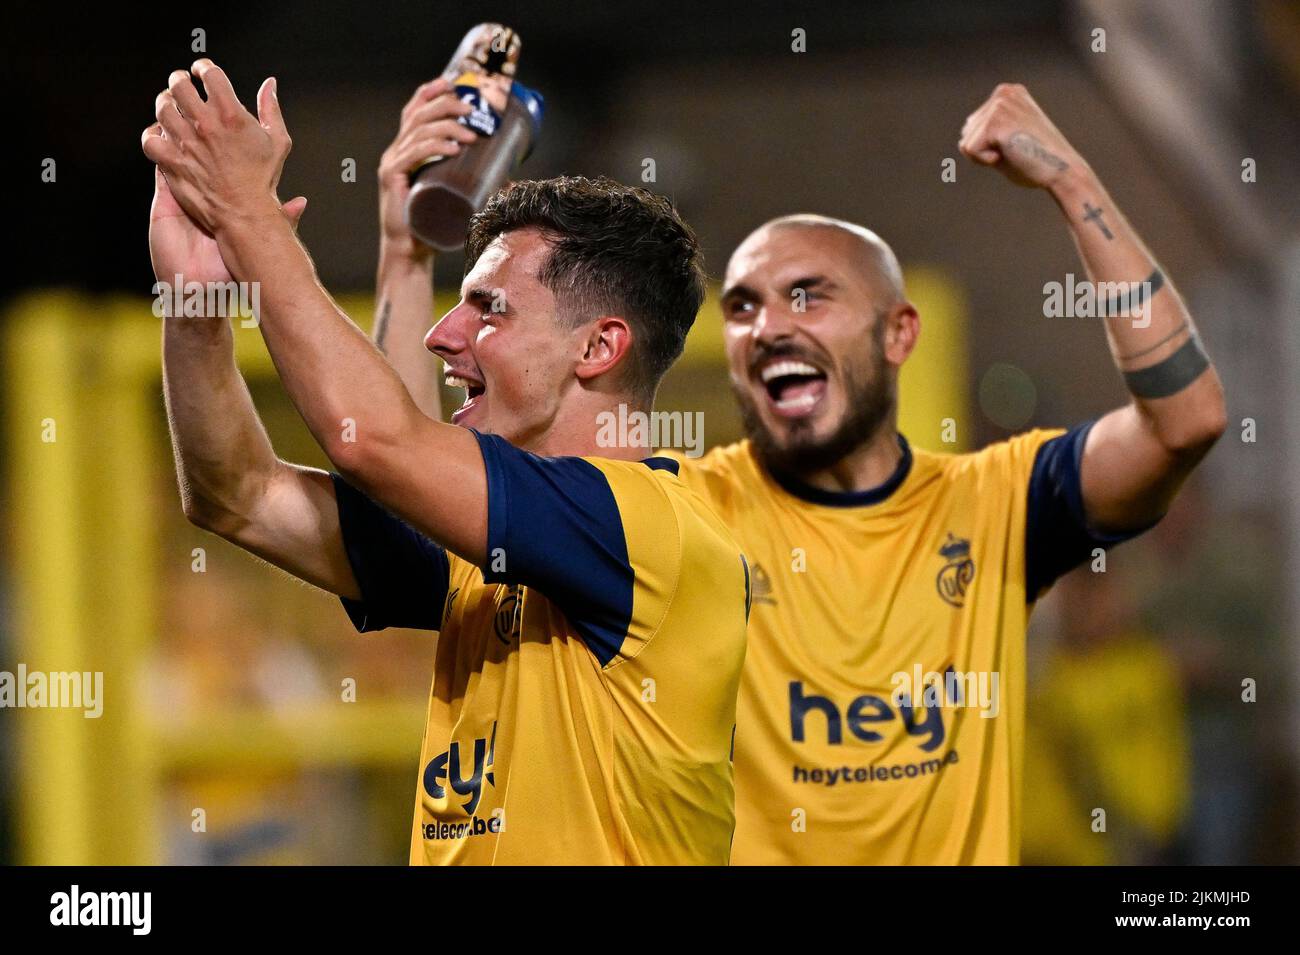 Heverlee, Belgium. 02nd Aug, 2022. Union's Dante Vanzeir and Union's Teddy Teuma celebrate after winning a match between Belgian soccer team Royale Union Saint-Gilloise and Scottish Rangers FC, Tuesday 02 August 2022 in Heverlee, the first leg in the third qualifying round of the UEFA Champions League competition. BELGA PHOTO LAURIE DIEFFEMBACQ Credit: Belga News Agency/Alamy Live News Stock Photo